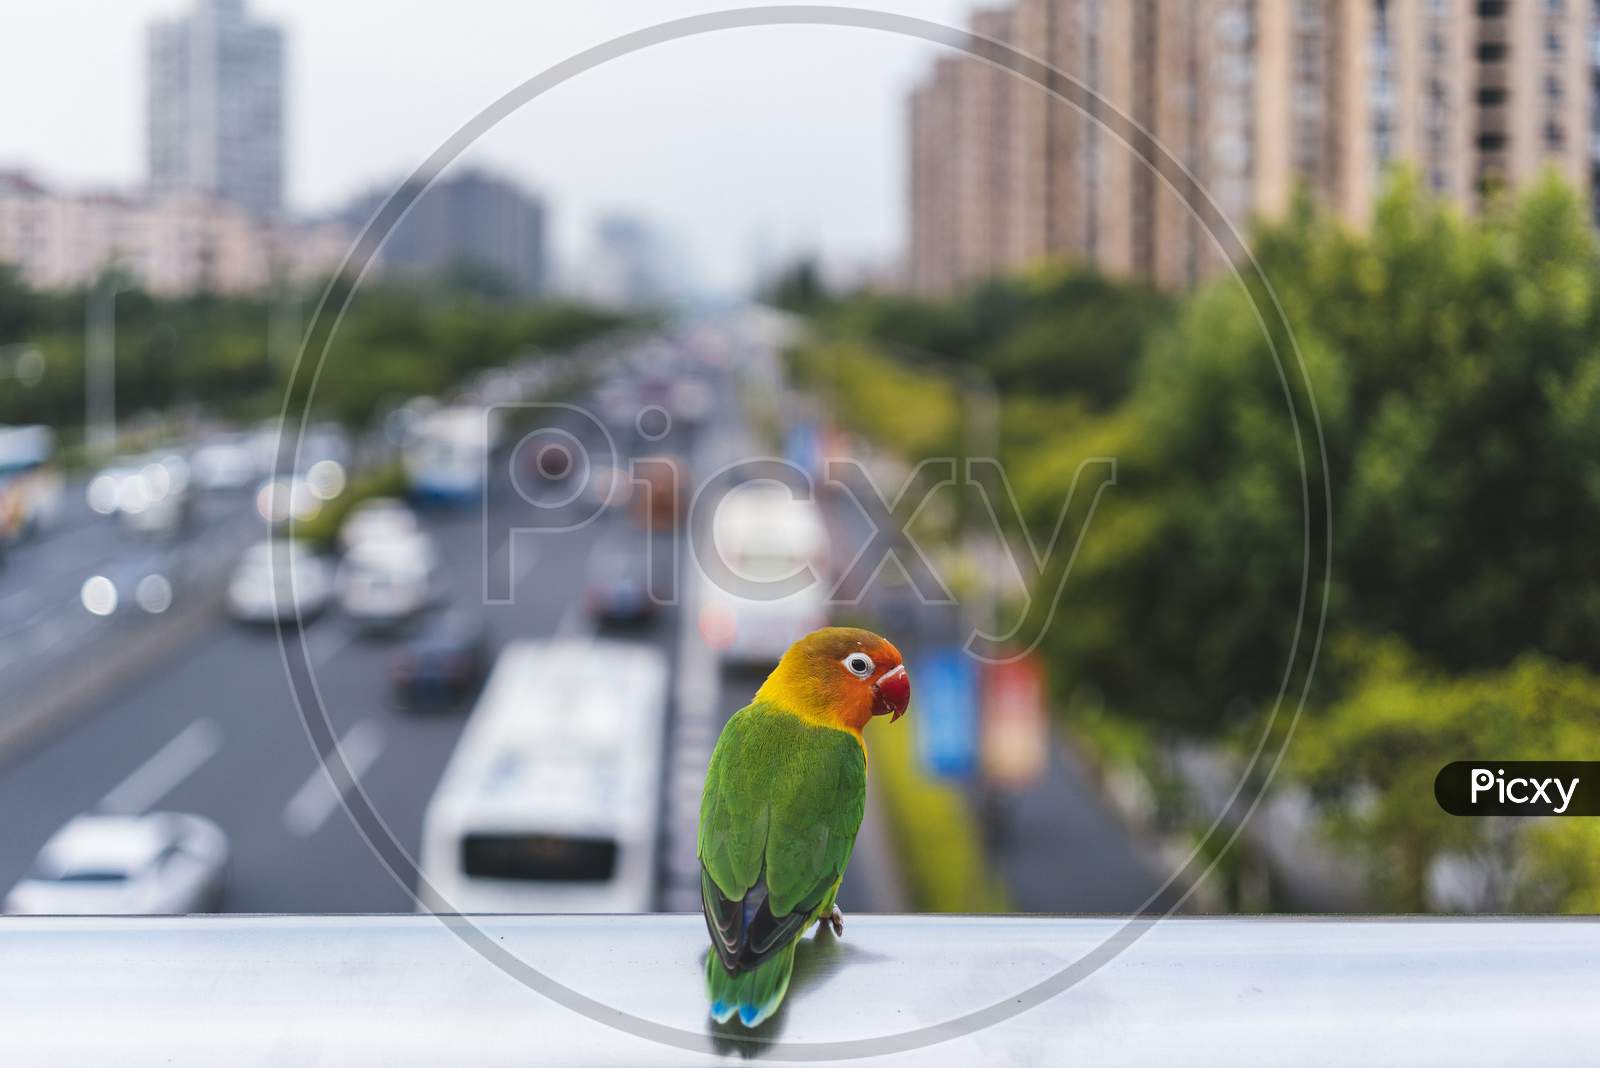 Budgerigar Bird Is Stopping By The Bridge On The Highway. With The Natural Beauty Of The Colors Of Green Feathers, Yellow, Orange, Red And Blue.